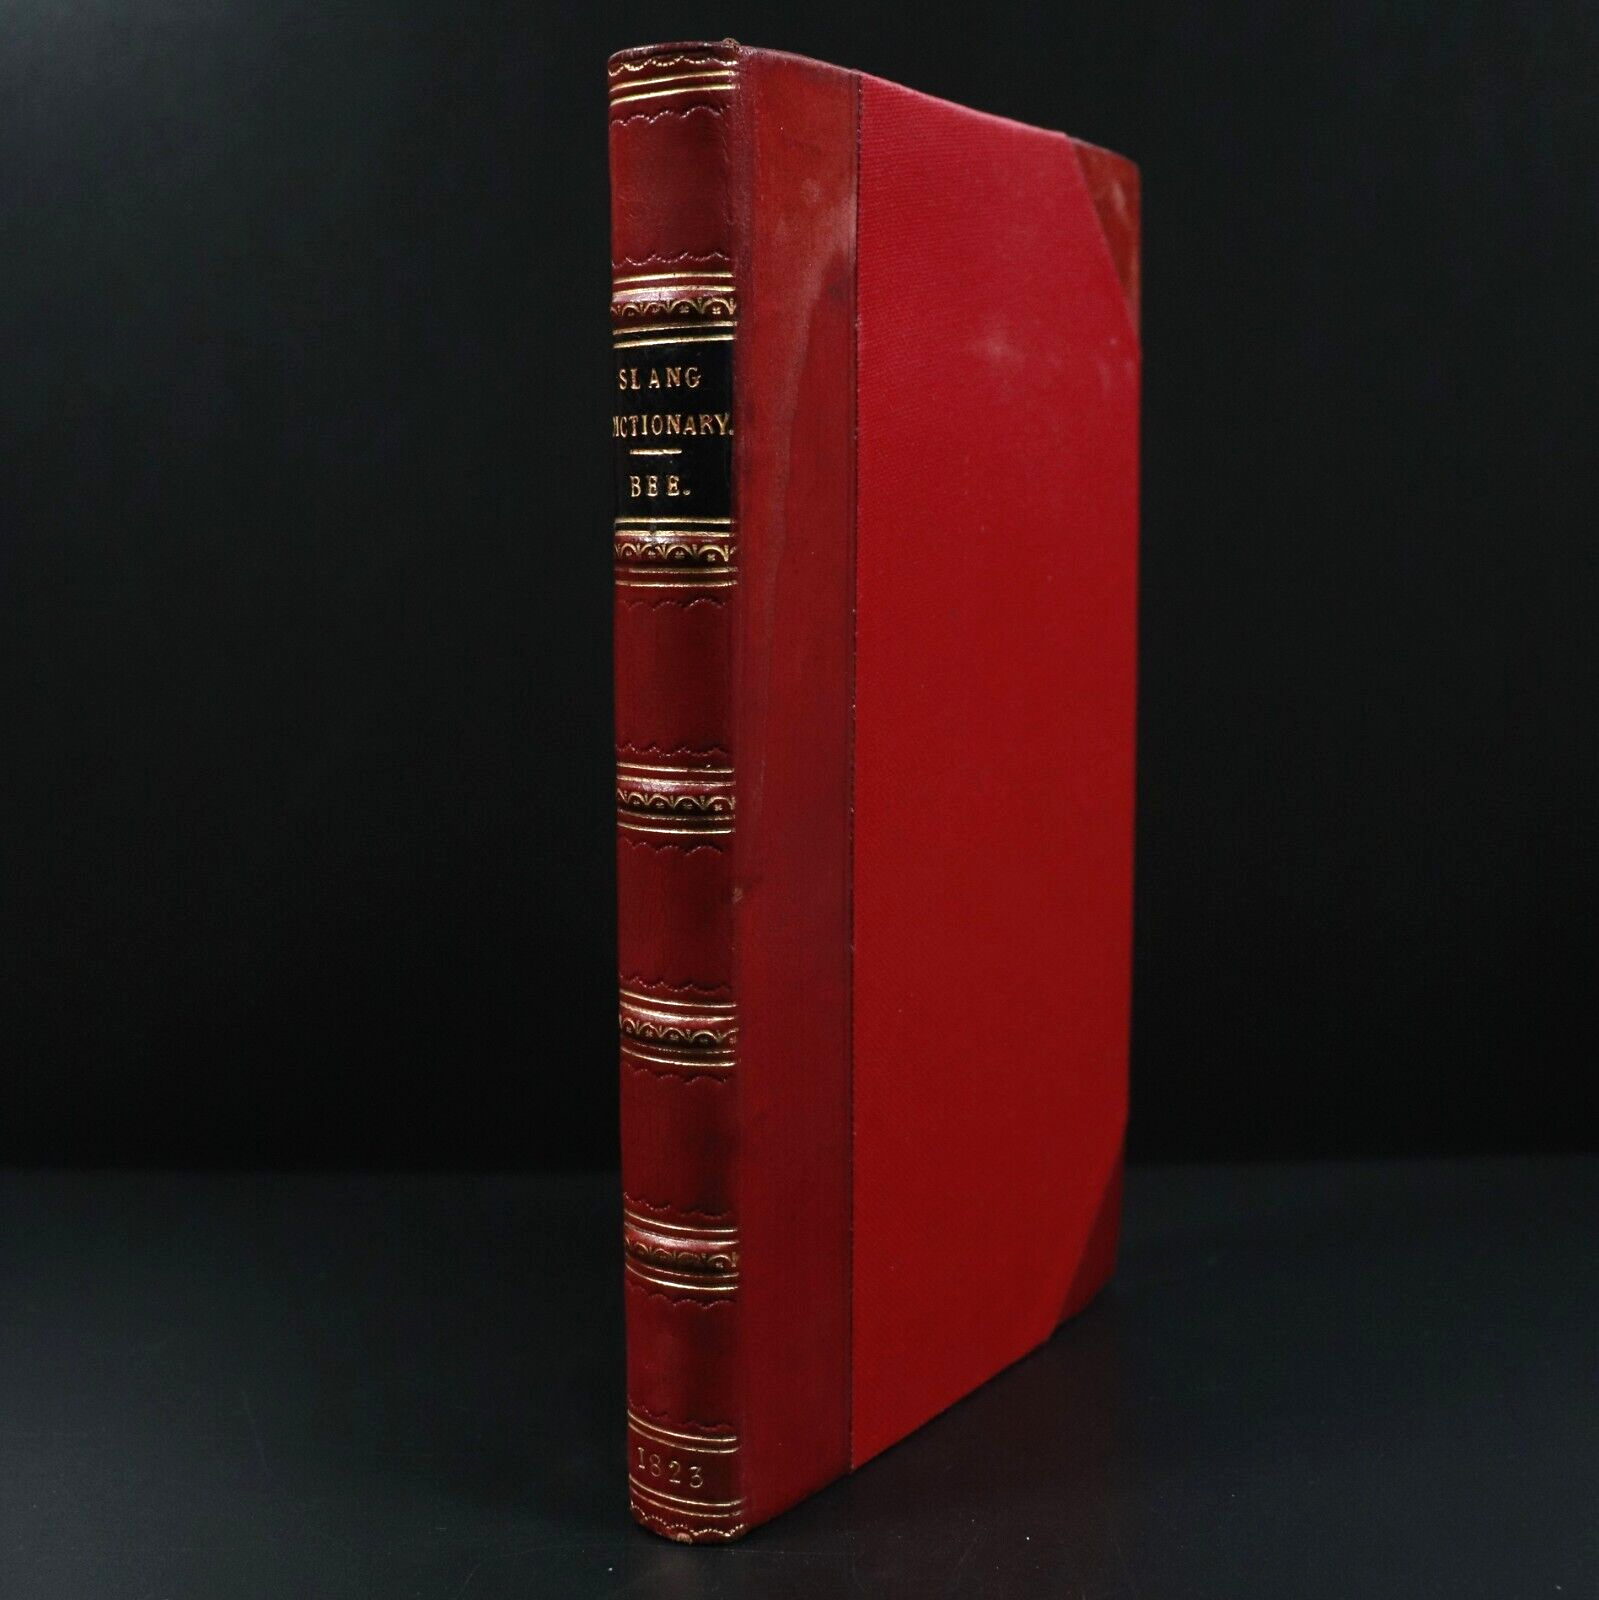 1823 A Slang Dictionary by Jon Bee Antiquarian English Language Reference Book